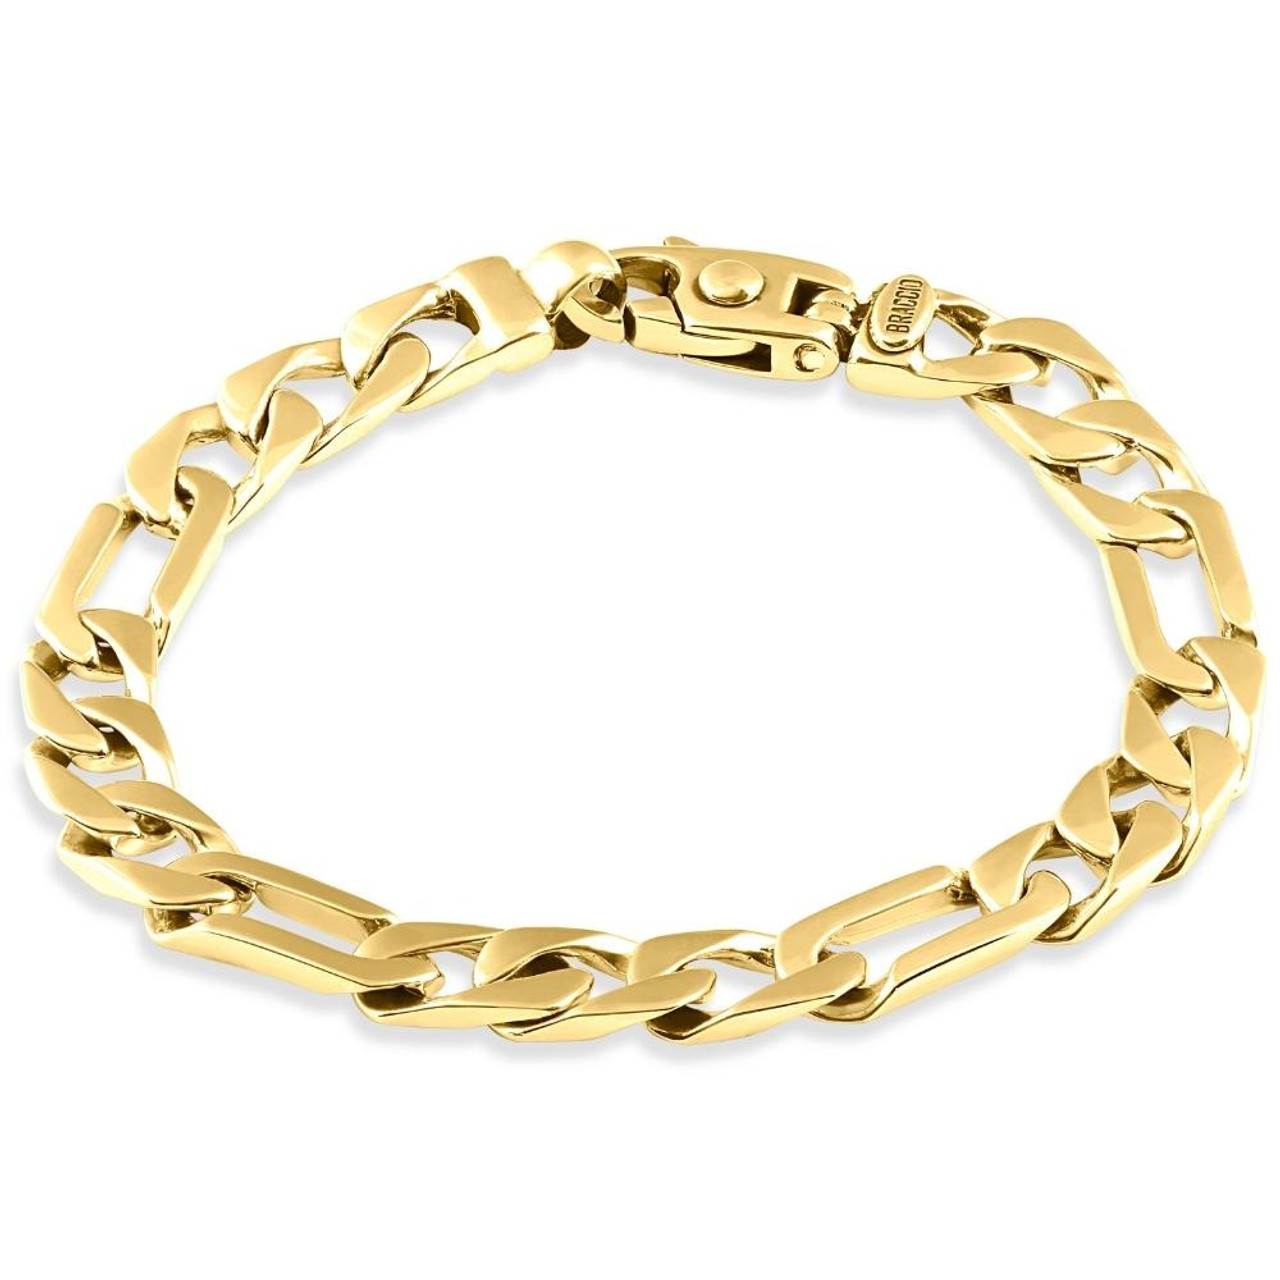 SOLID 14K YELLOW GOLD MADE IN ITALY CUBAN CURB LINK BRACELET 8.25